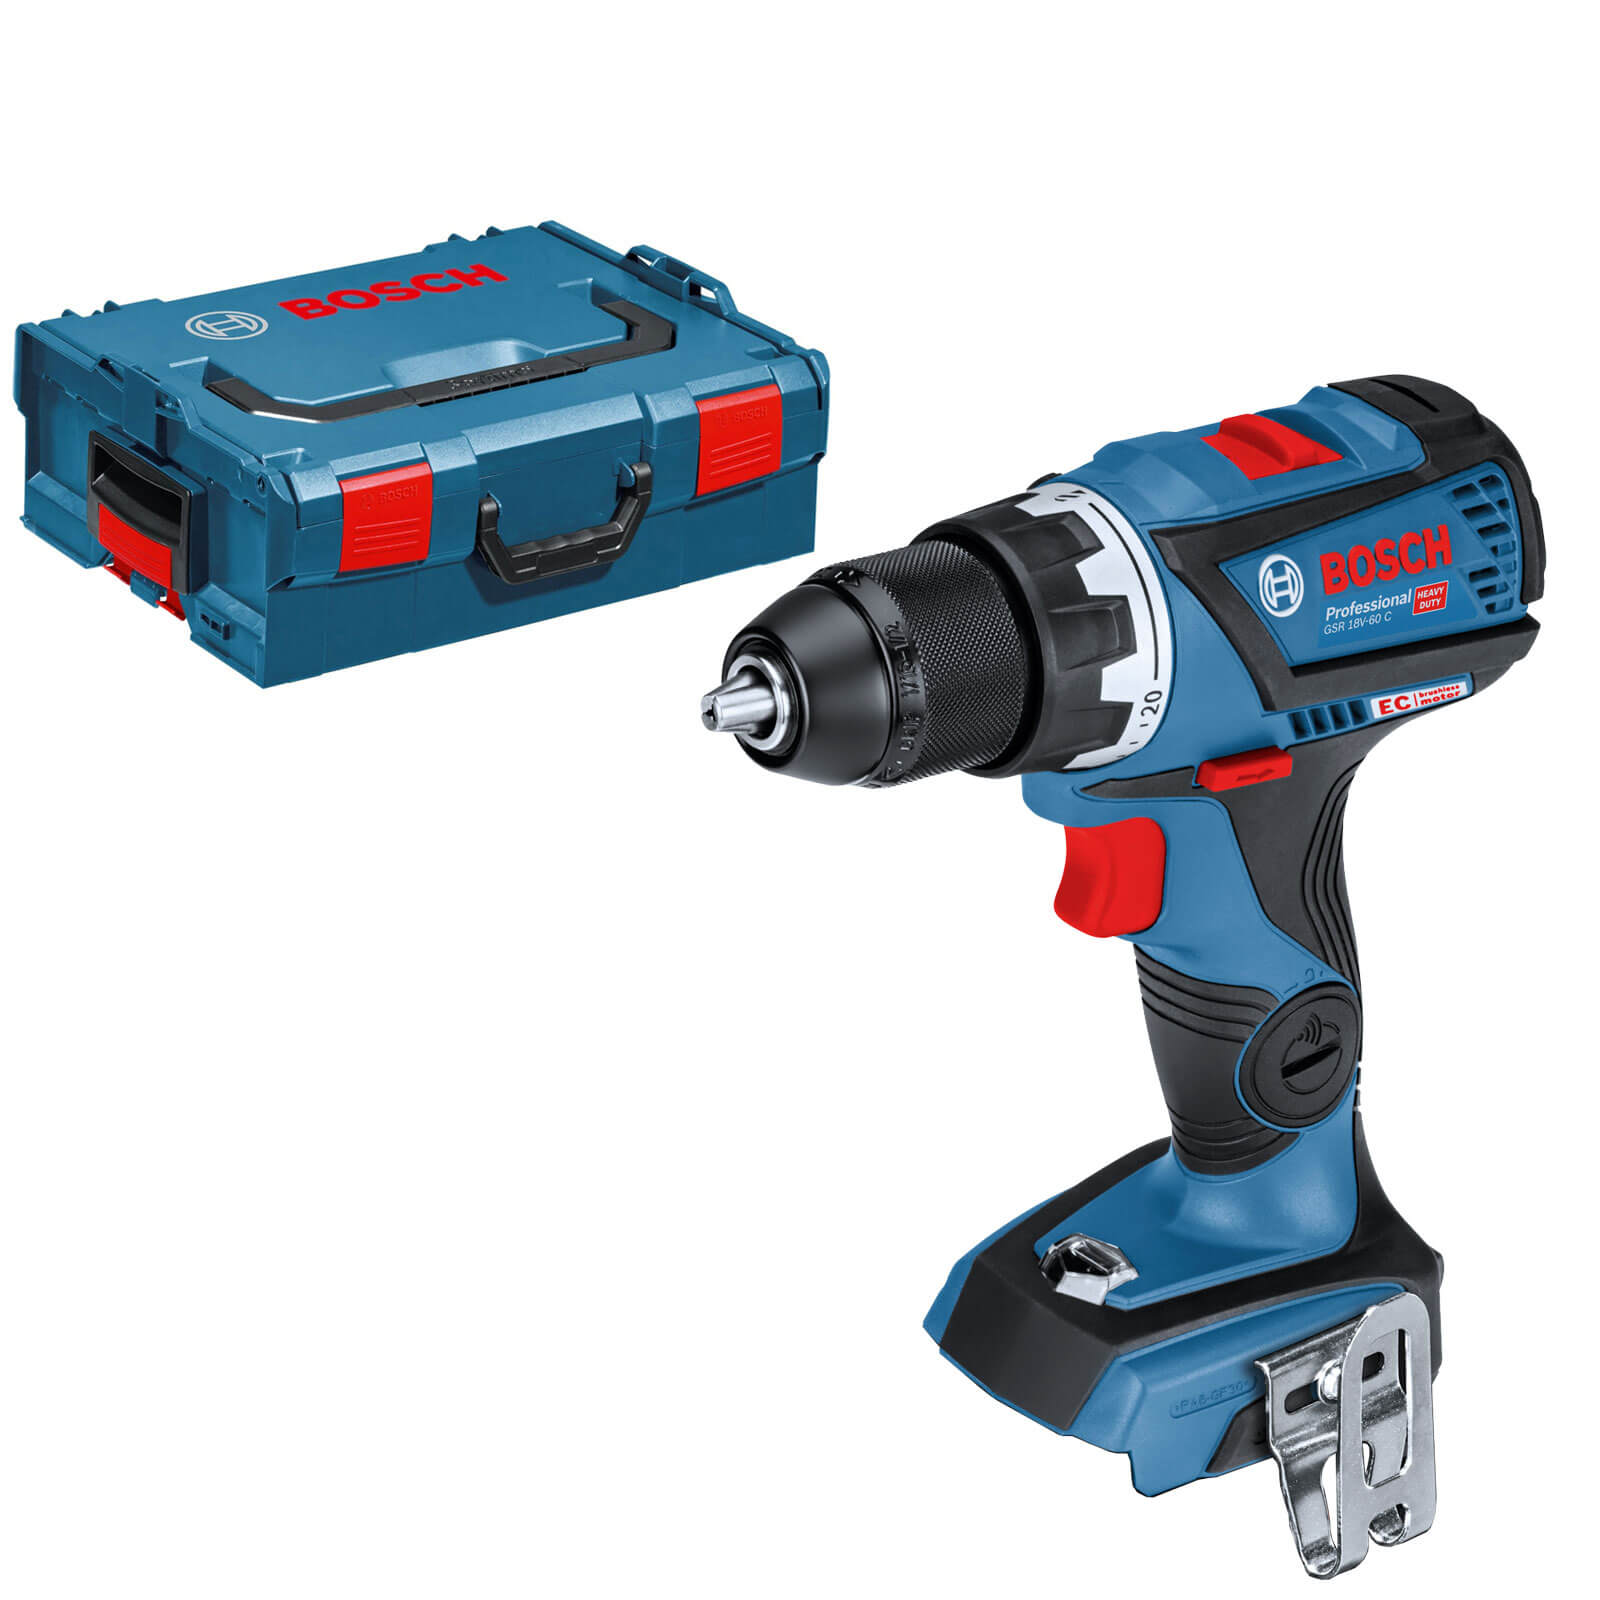 Bosch GSB 18 V-60 C 18v Cordless Connect Ready Combi Drill No Batteries No Charger Case